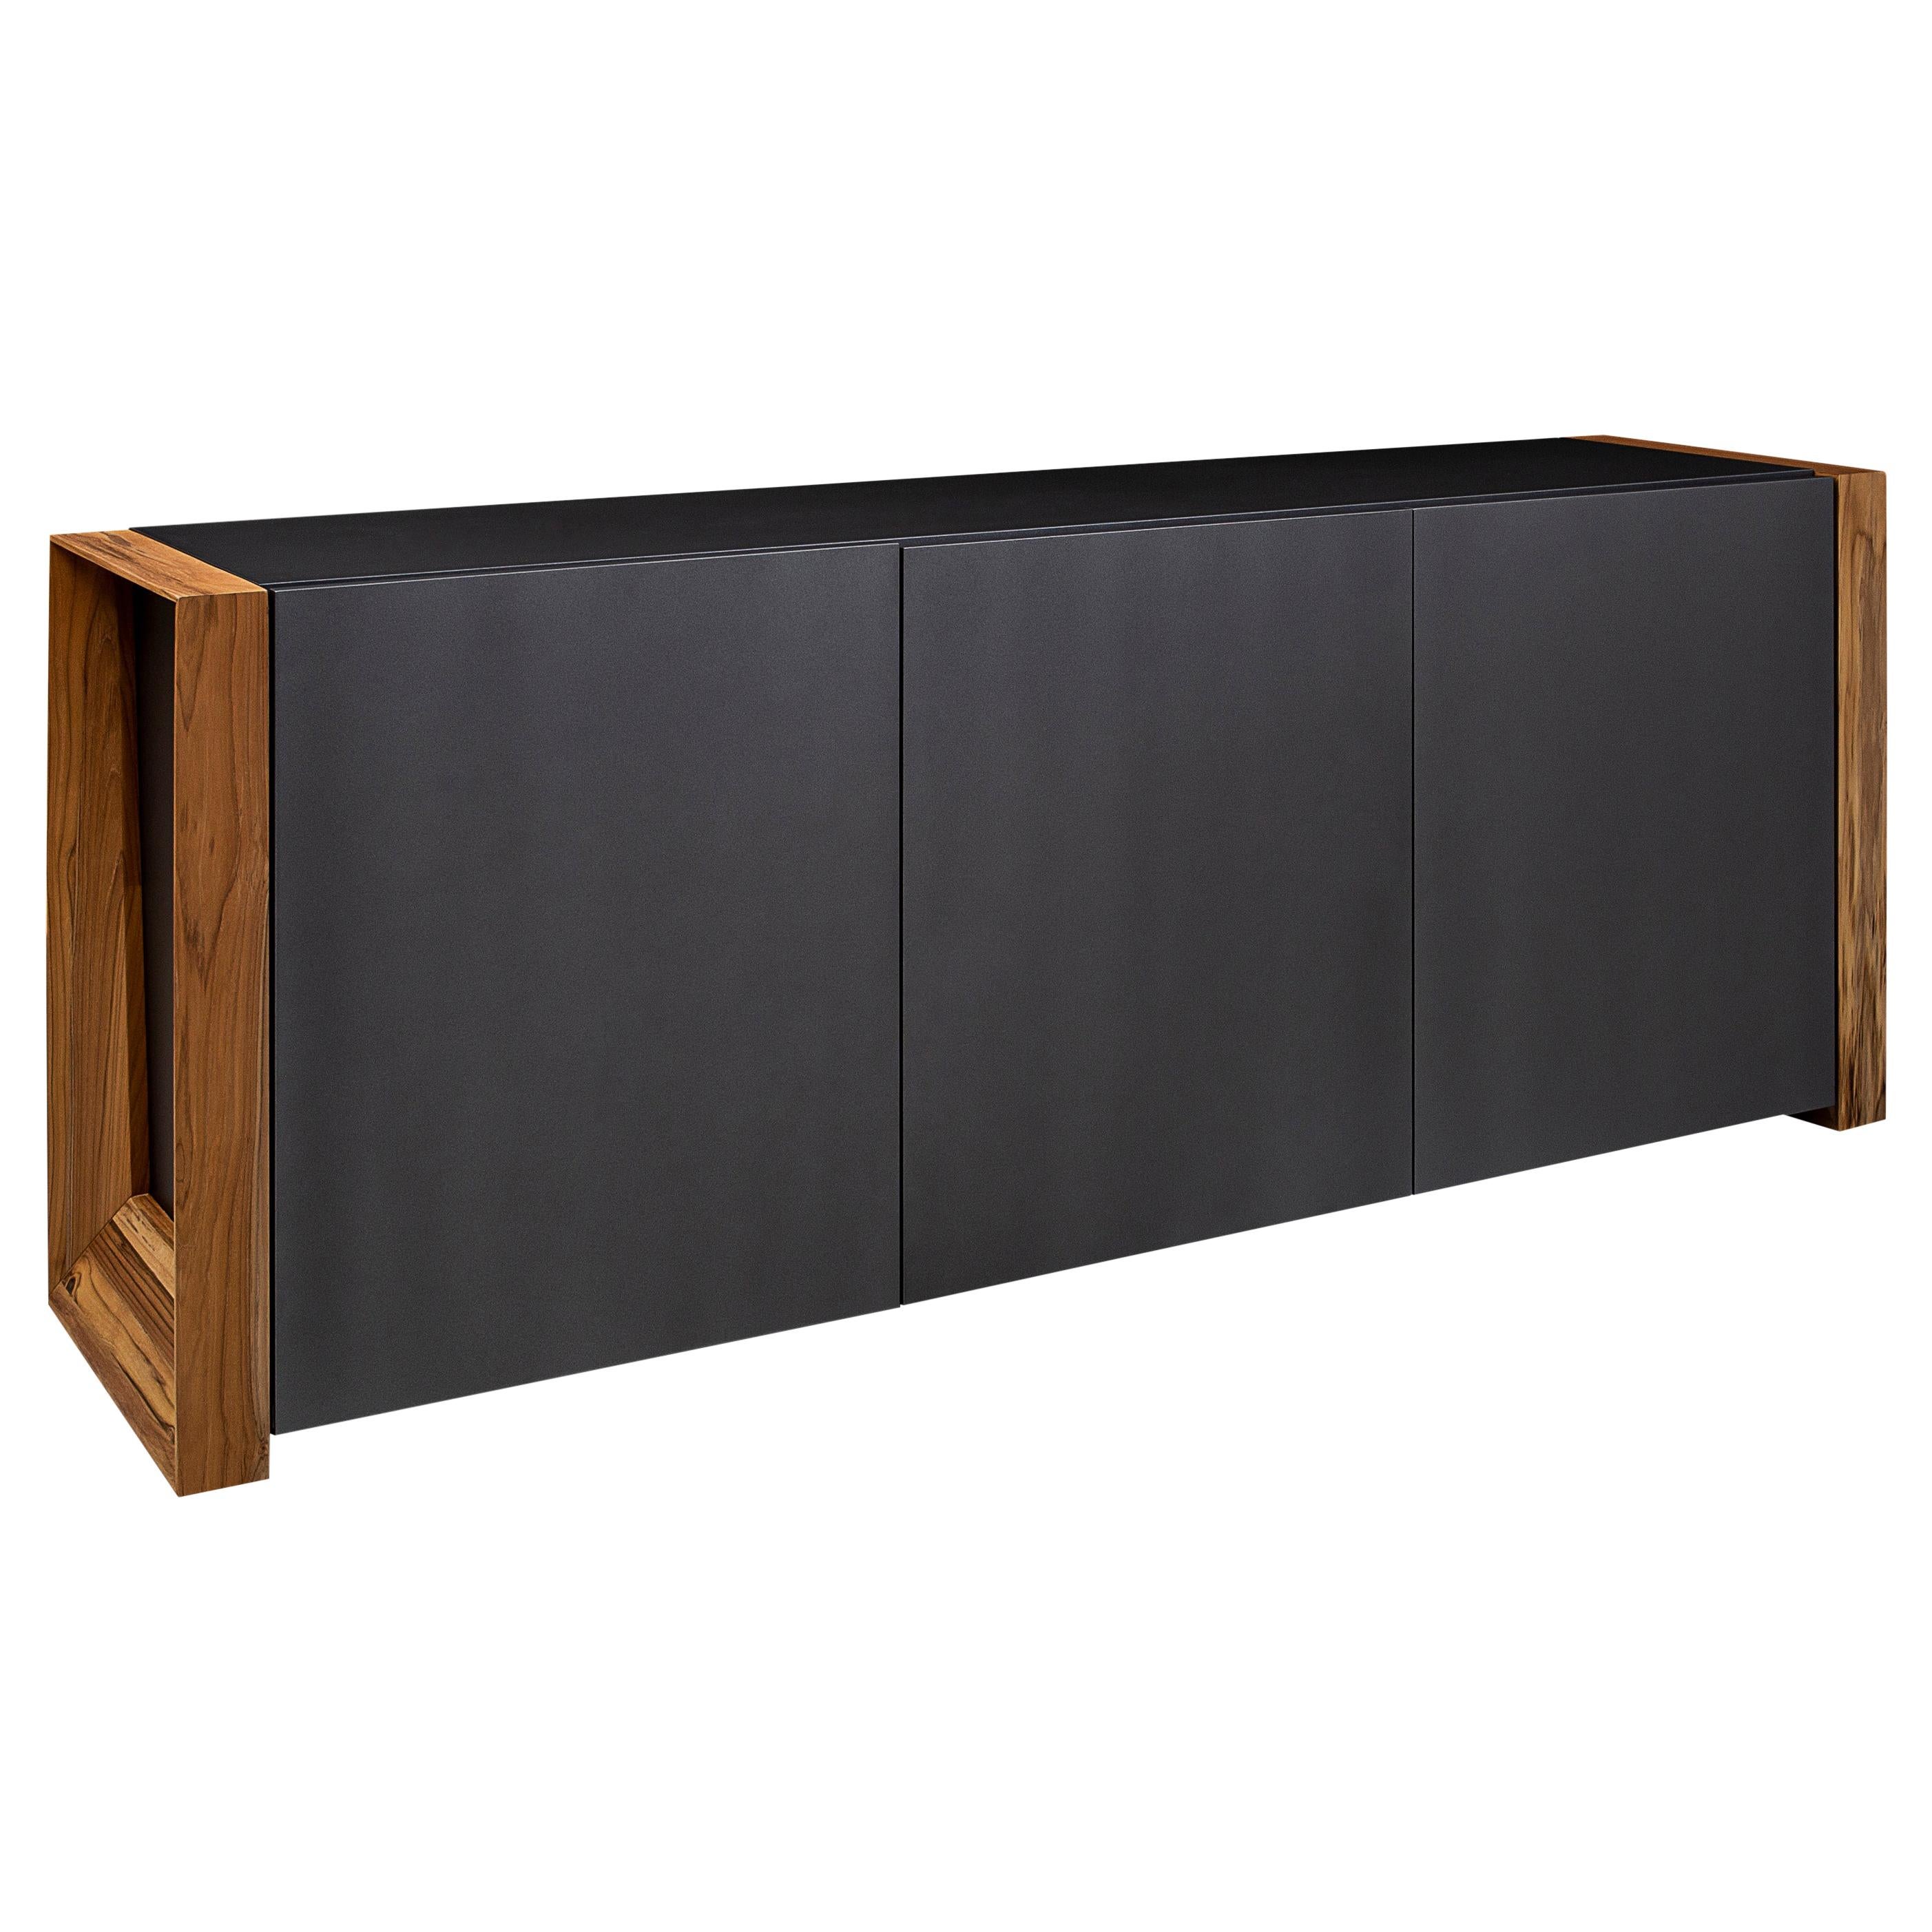 Masp Sideboard in Graphite Finish and Teak Wood Finish End Frames